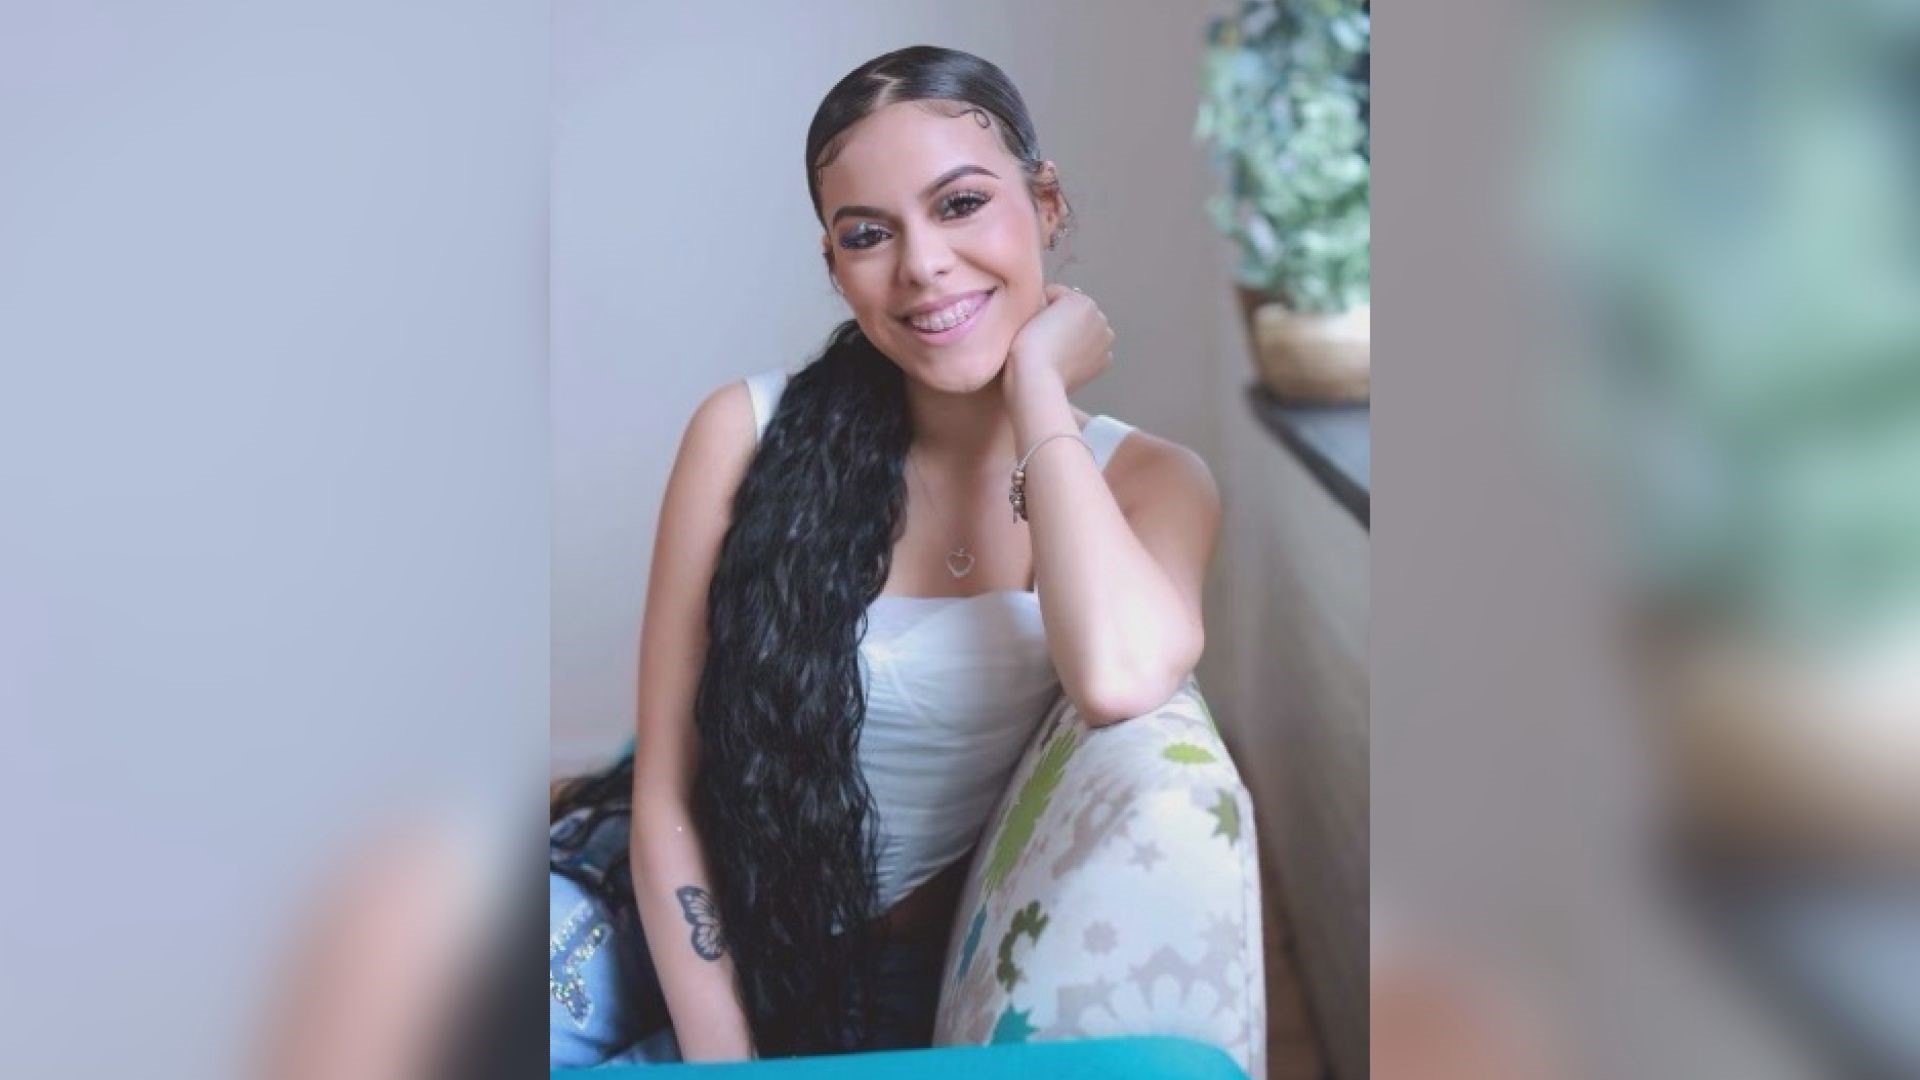 Alana Vasquez, 19, was shot and killed at a car meetup early Sunday morning. Now, her family wants to find the one responsible.